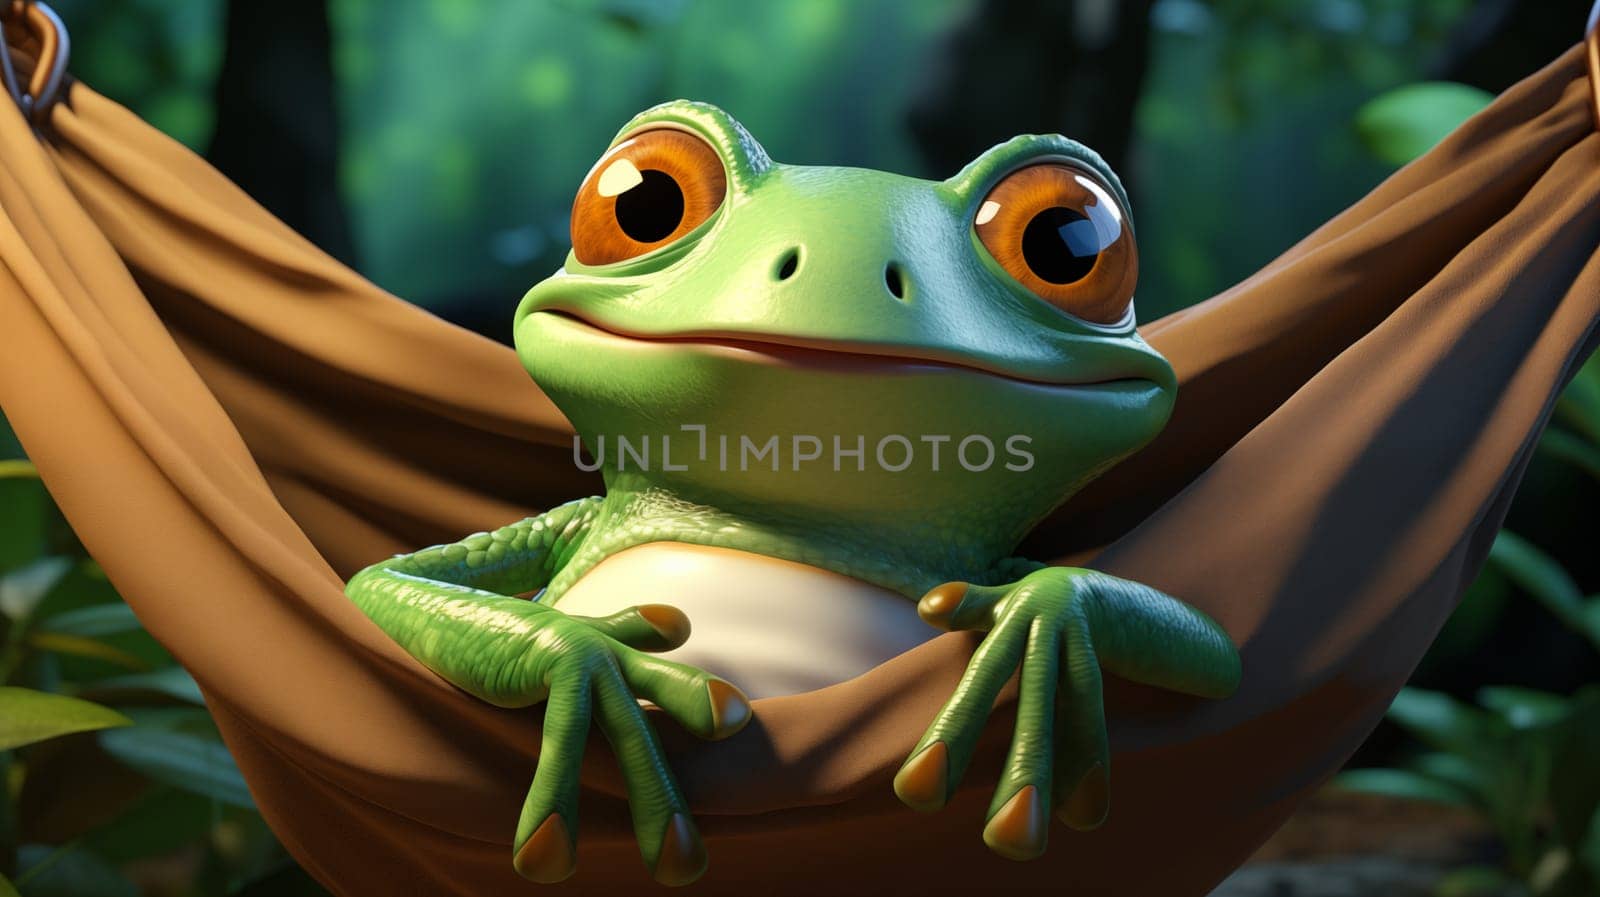 A vibrant, green frog with big eyes comfortably nestled in a brown hammock, by Zakharova